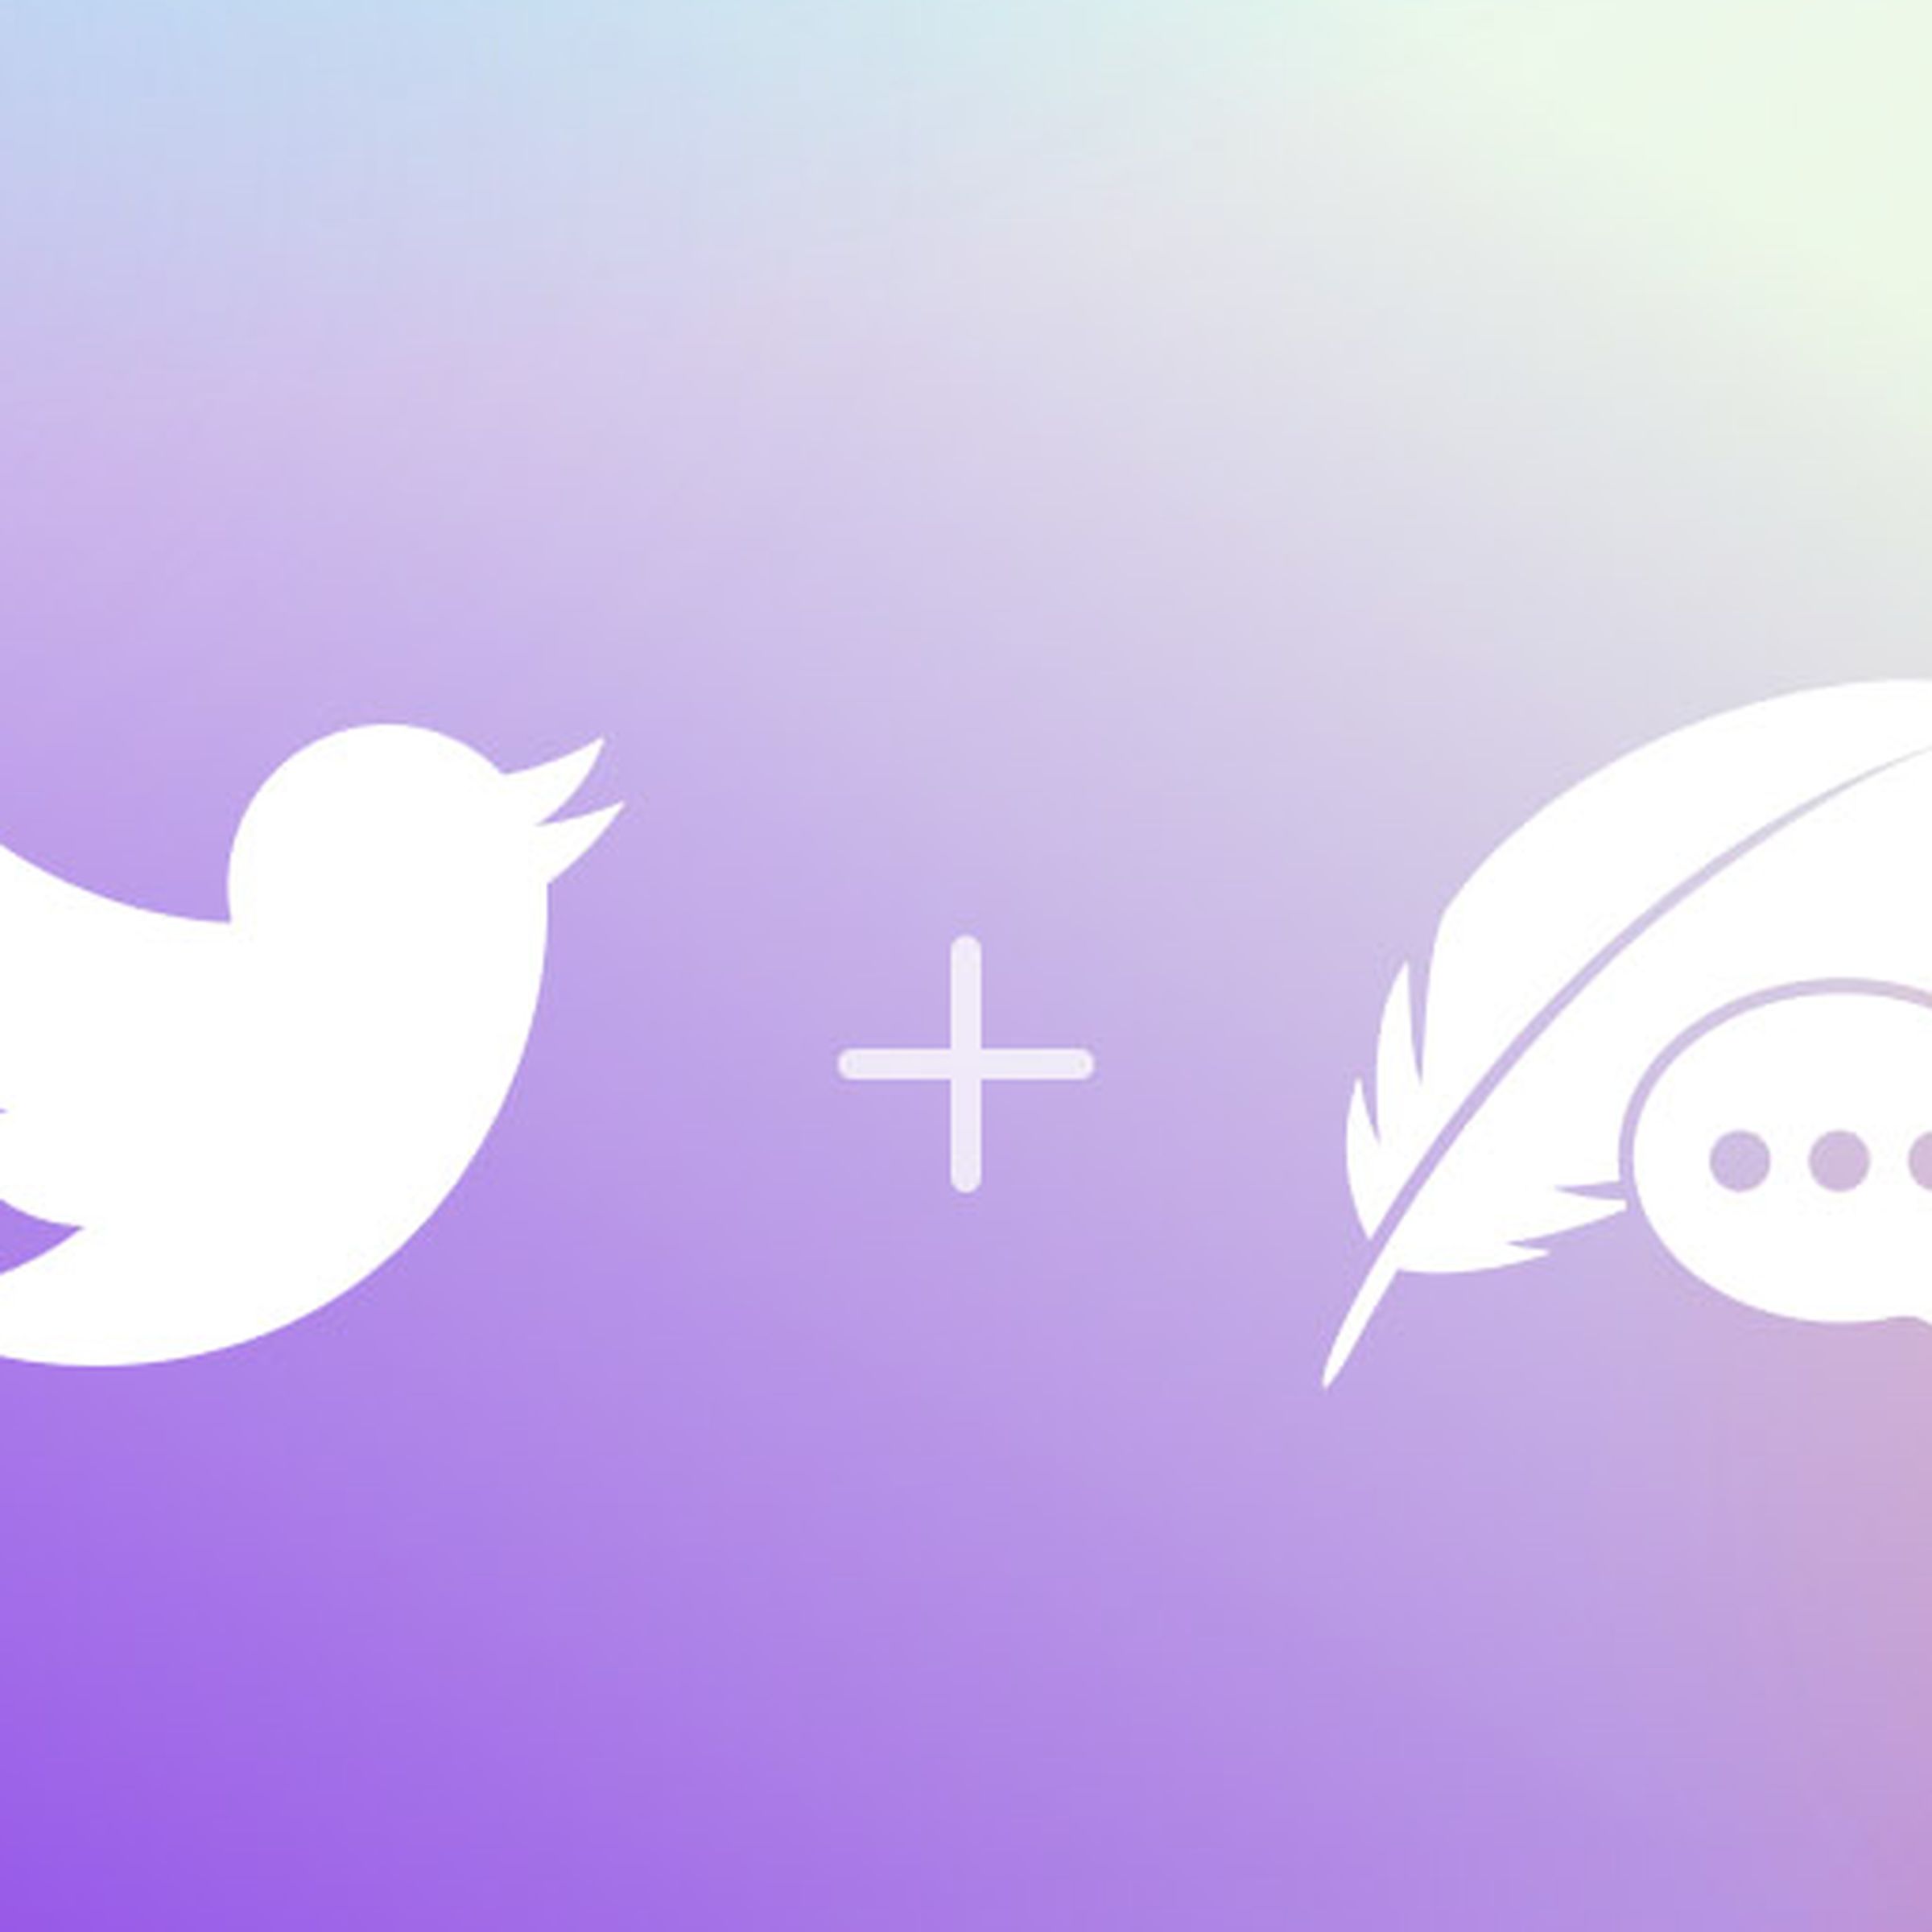 Twitter is acquiring Quill